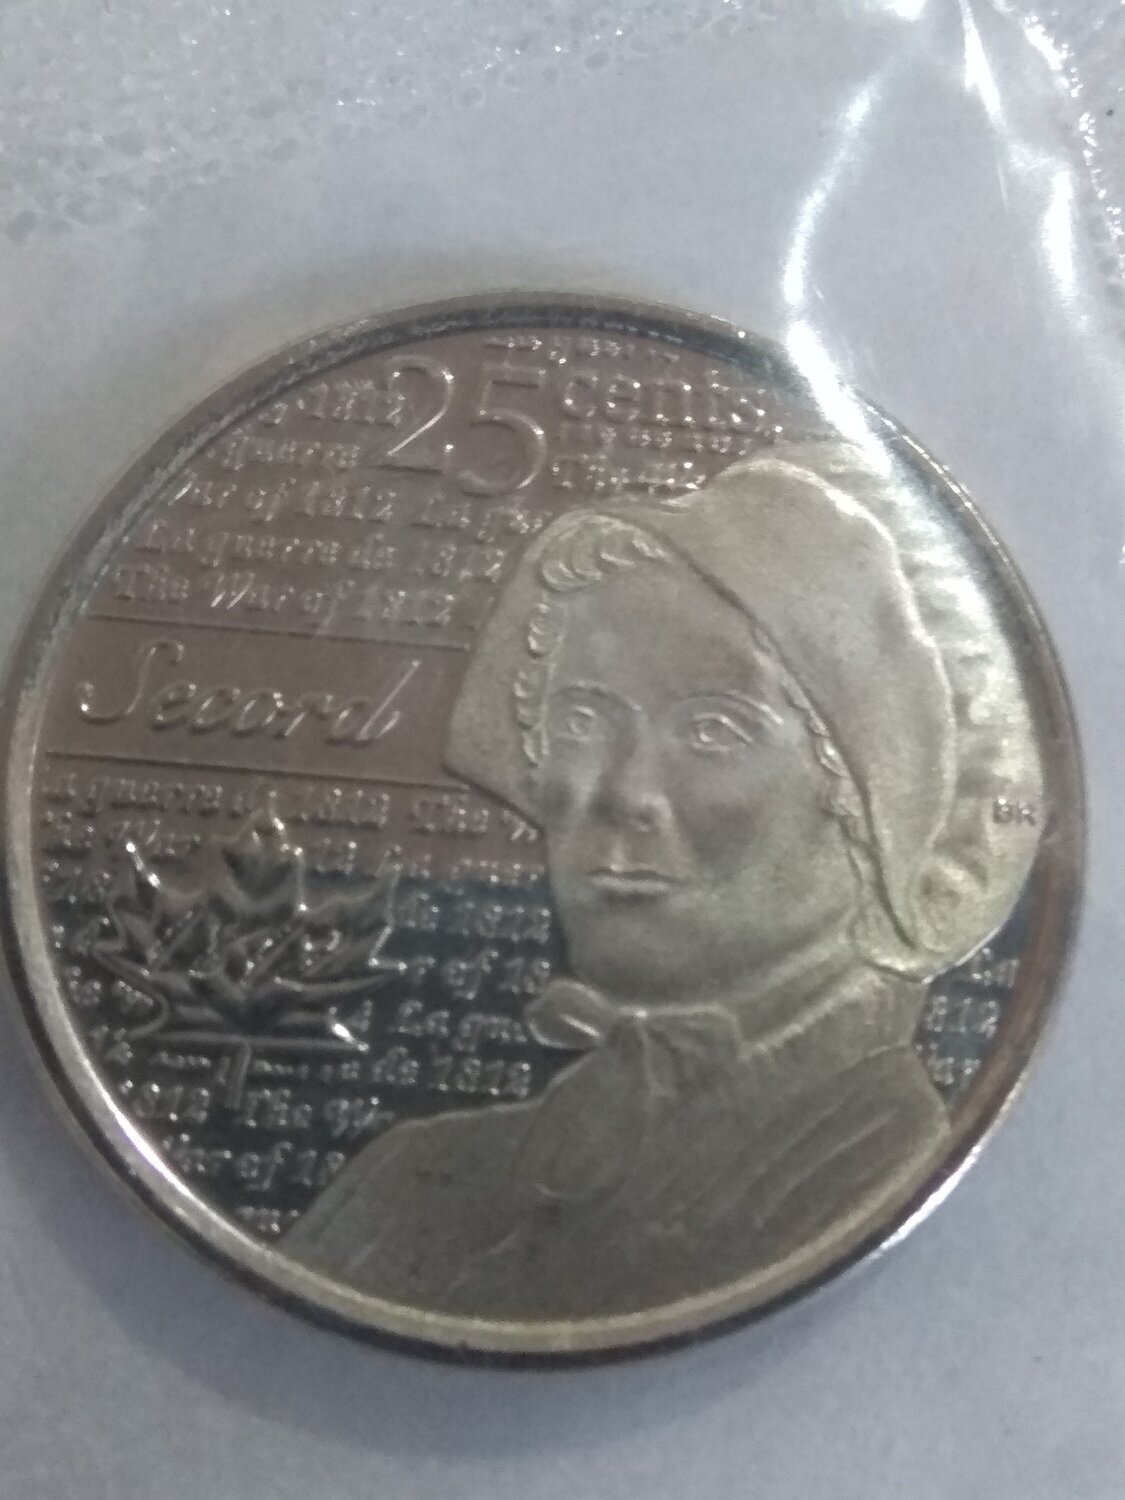 Canada. Elizabeth II. 2013. 25 cents. Series: 1812-2012. Heroes of the War of 1812 # 07. Laura Secord. Fe-Ni 4.430 g. Proof-like